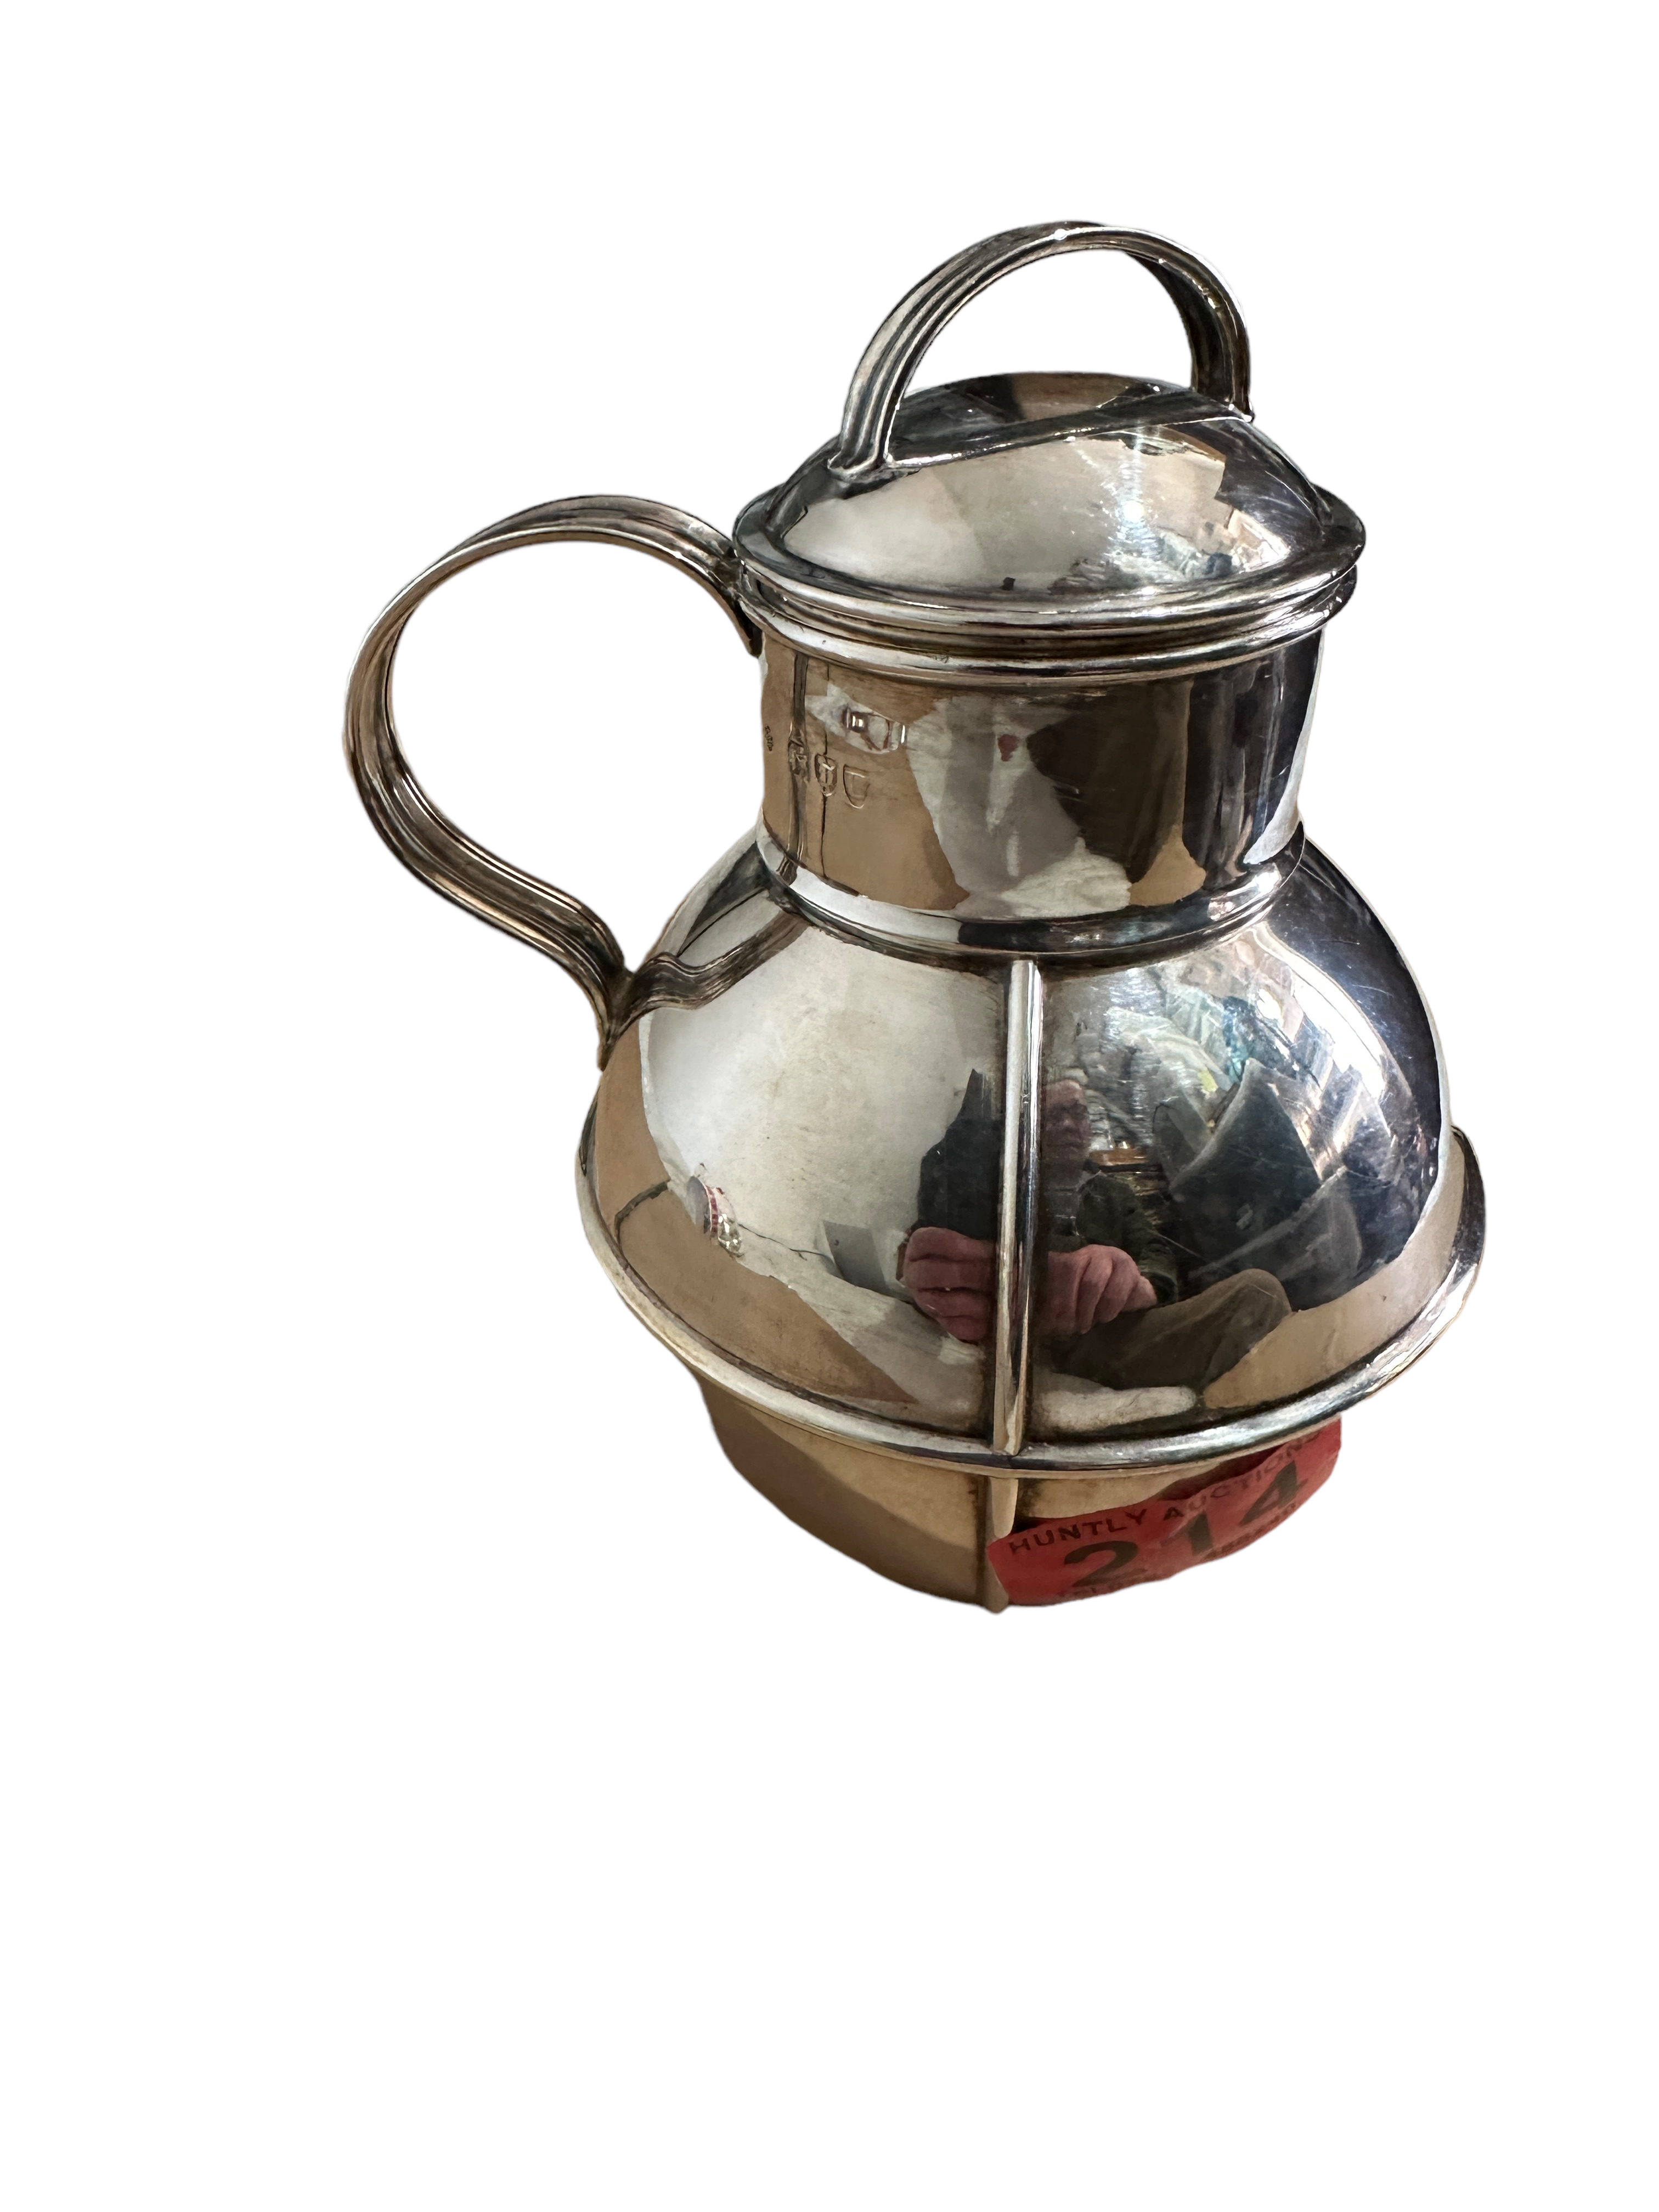 Vintage Silver Lidded Milk Jug - 15cm tall and 14cm at the widest.